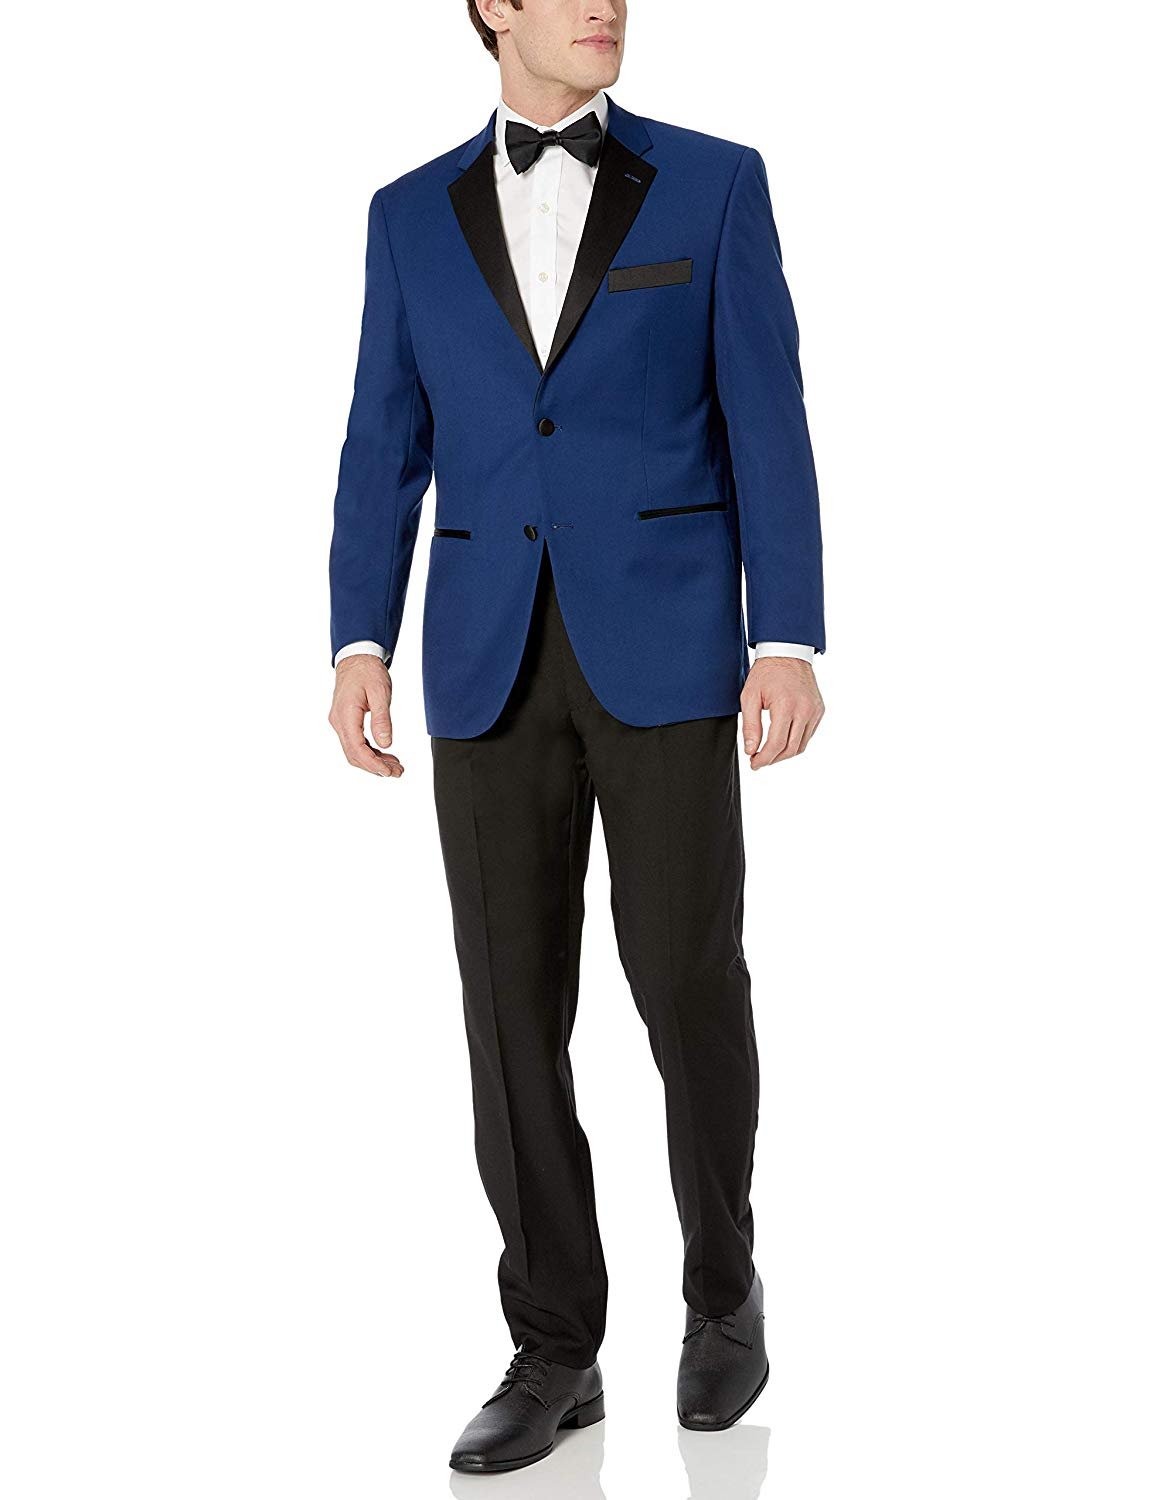 Available in Many Sizes & Colors Adam Baker Mens Classic & Slim Fit Two-Piece Formal Tuxedo Suit